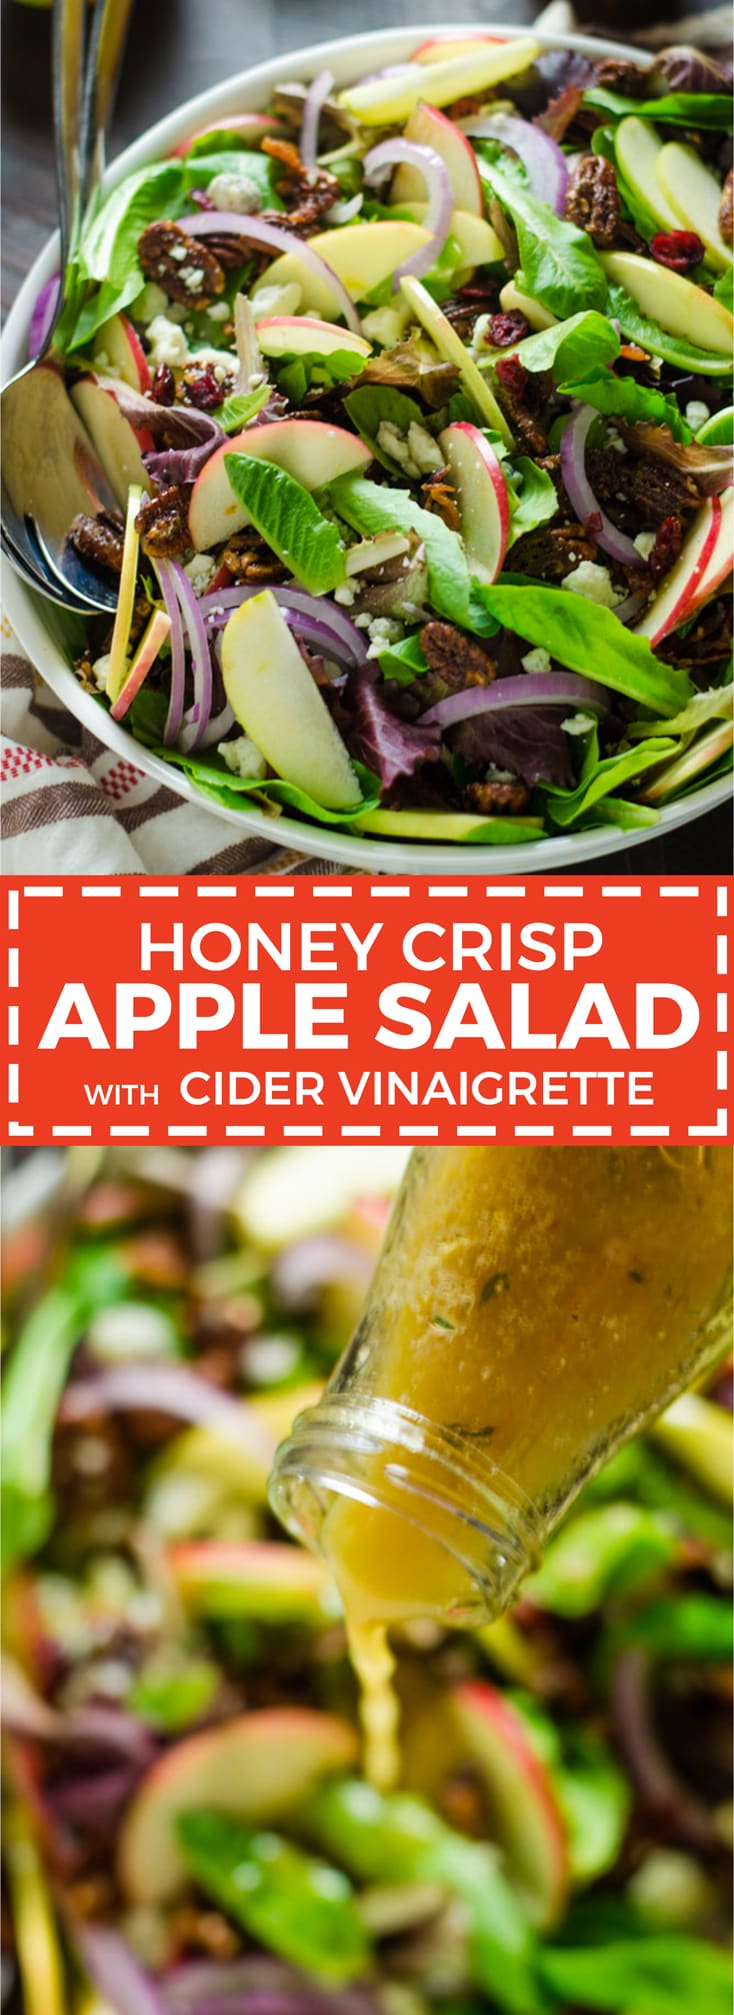 Honey Crisp Apple Salad with Cider Vinaigrette. Baby romaine greens, honey crisp apples, candied pecans, gorgonzola crumbles, dried cranberries, and red onion pack this salad with bold flavor! Not to mention the homemade cider vinaigrette makes the whole thing taste so perfectly Fall-worthy. | hostthetoast.com